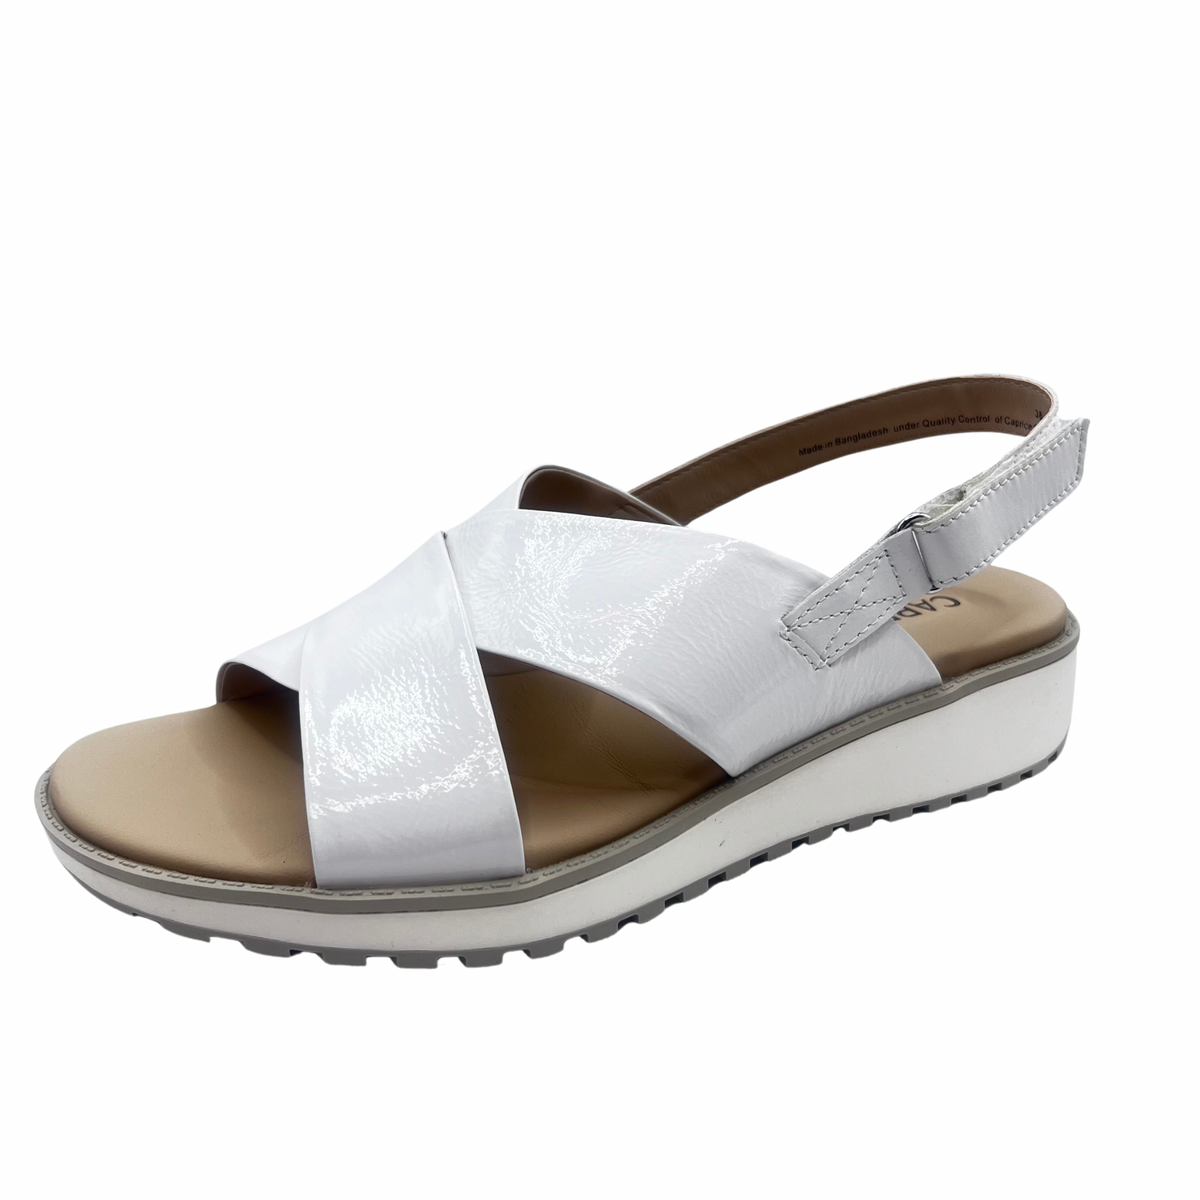 Caprice White Patent Crossover Low wedge Sandals